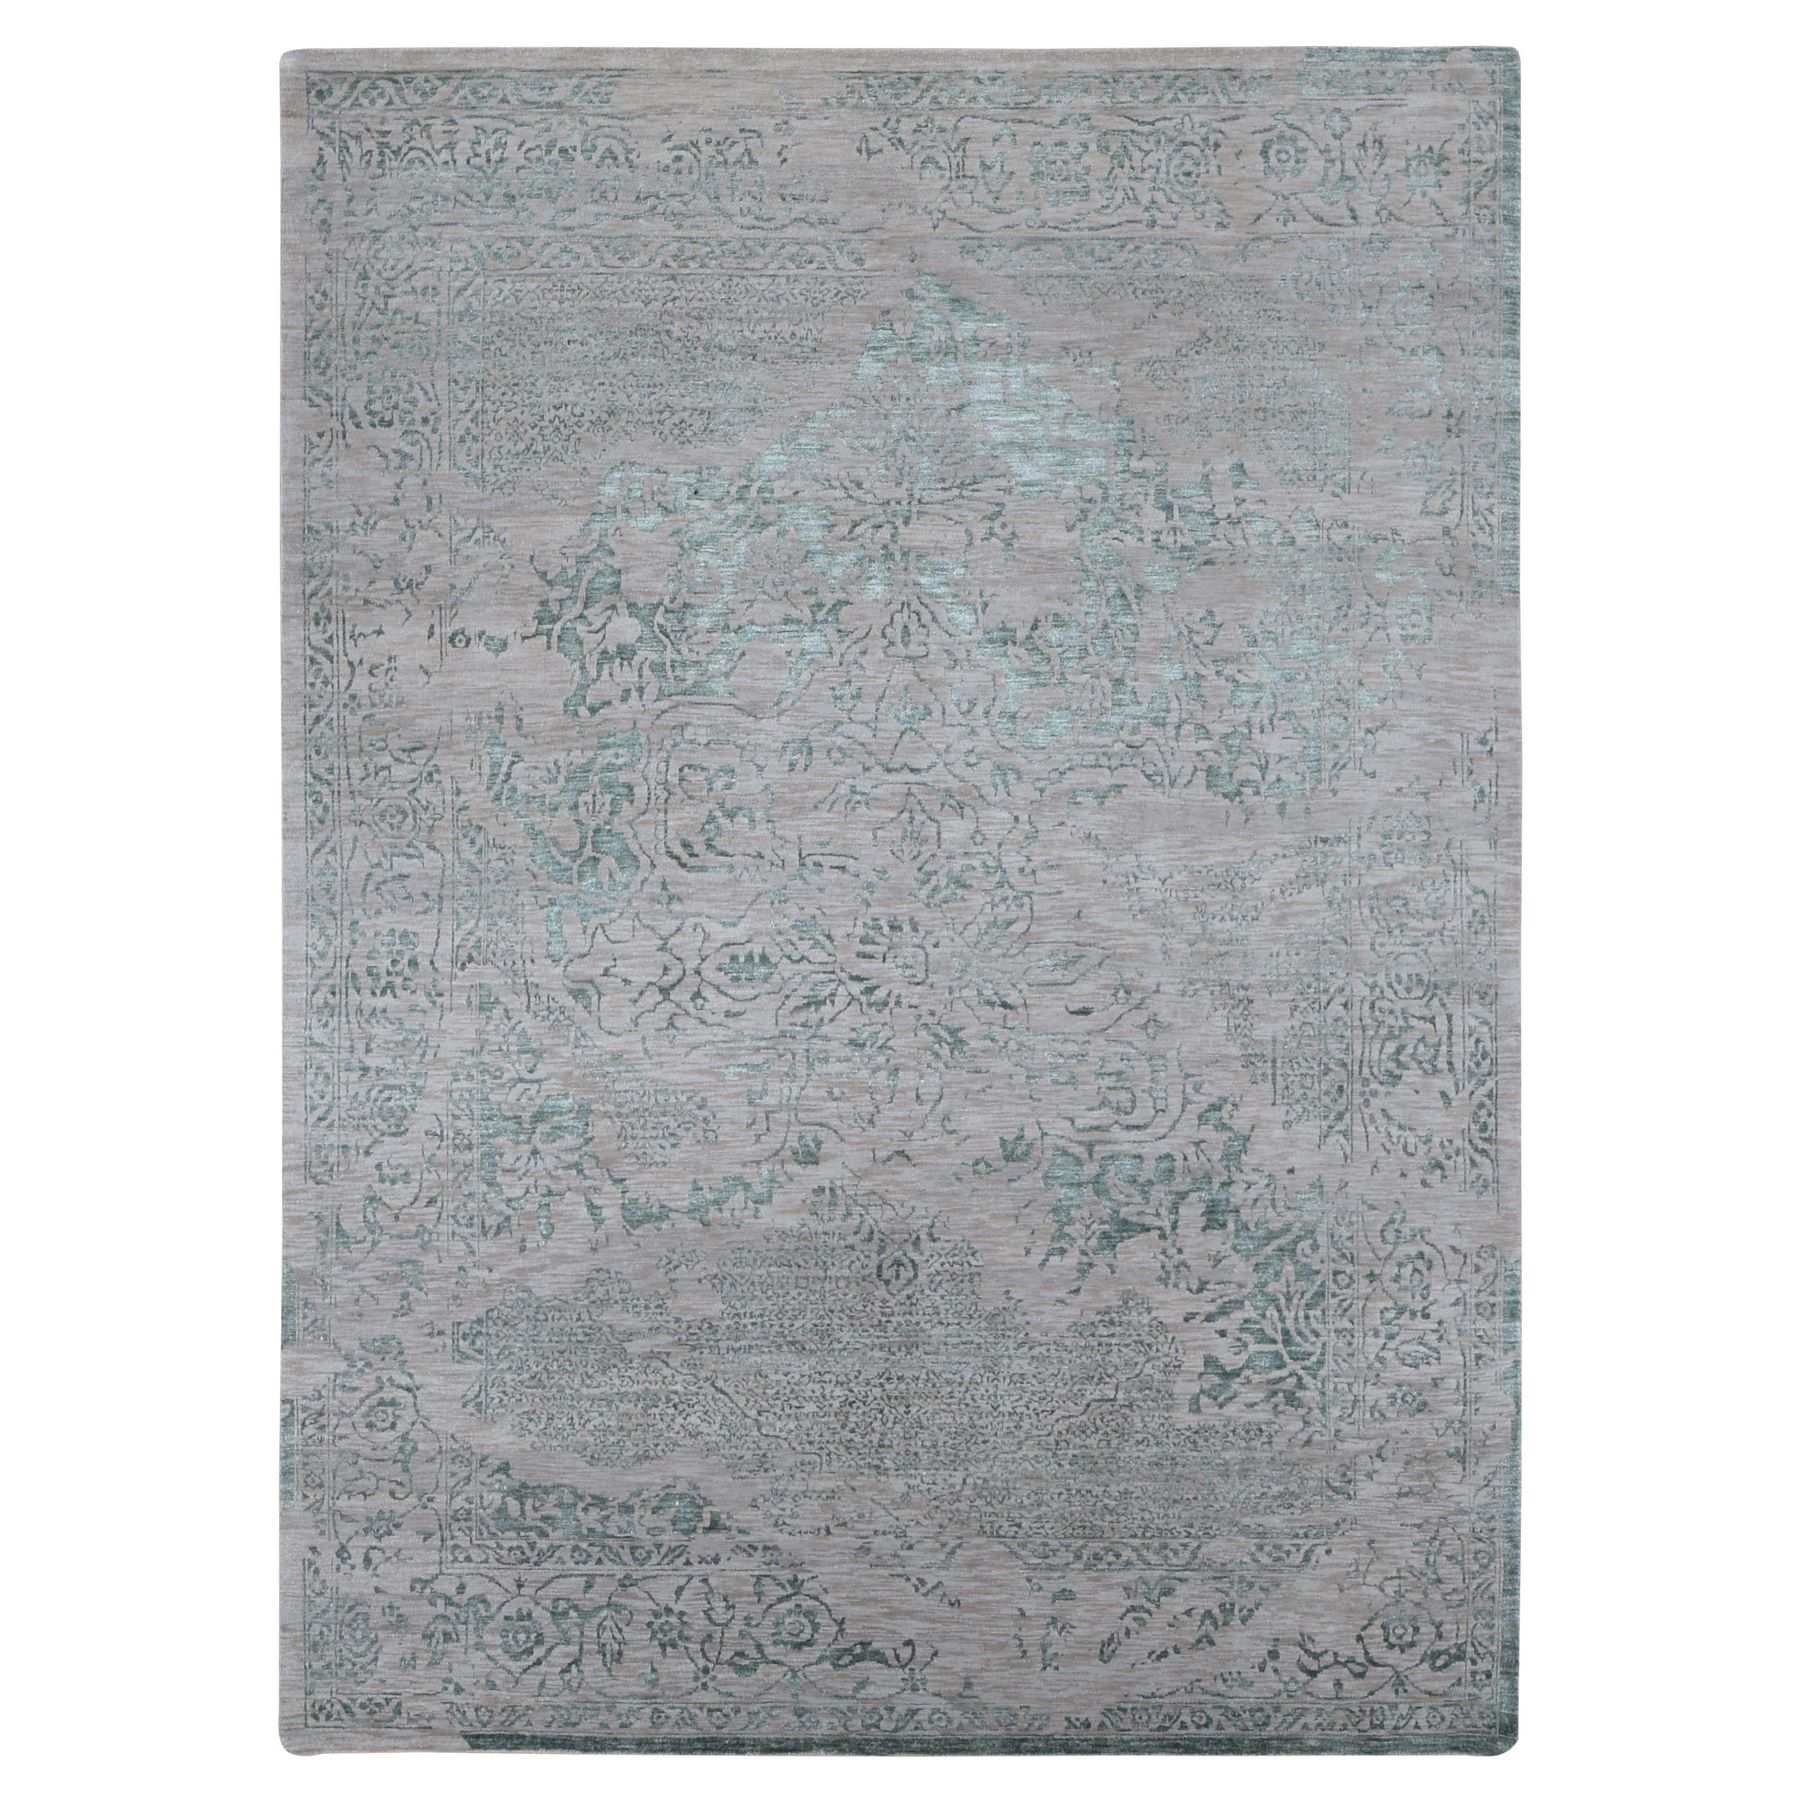  Silk Hand-Knotted Area Rug 8'10